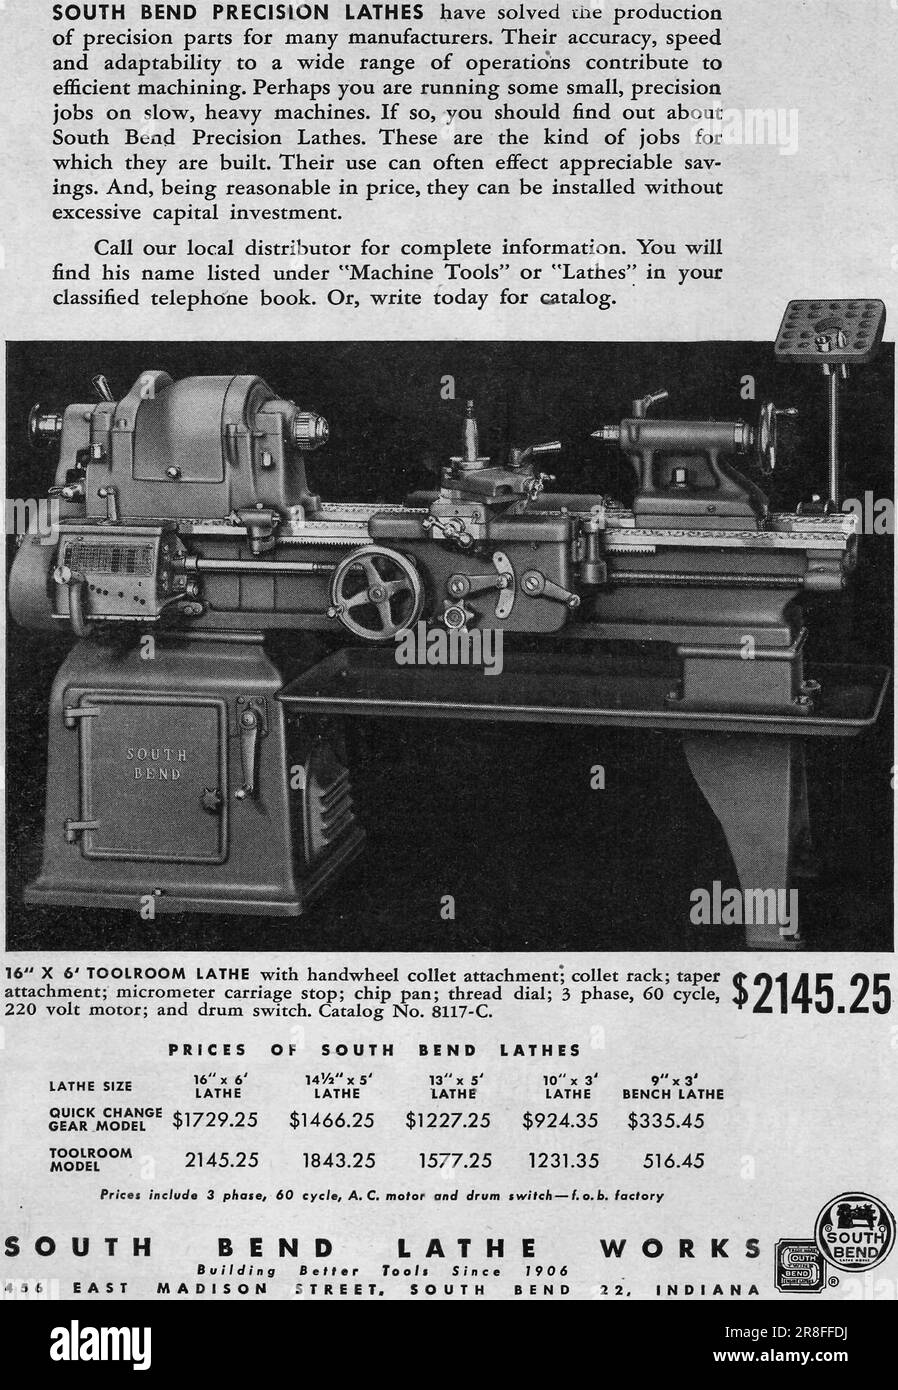 South bend lathe works - Machine tools advert in a magazine 1949 Stock Photo